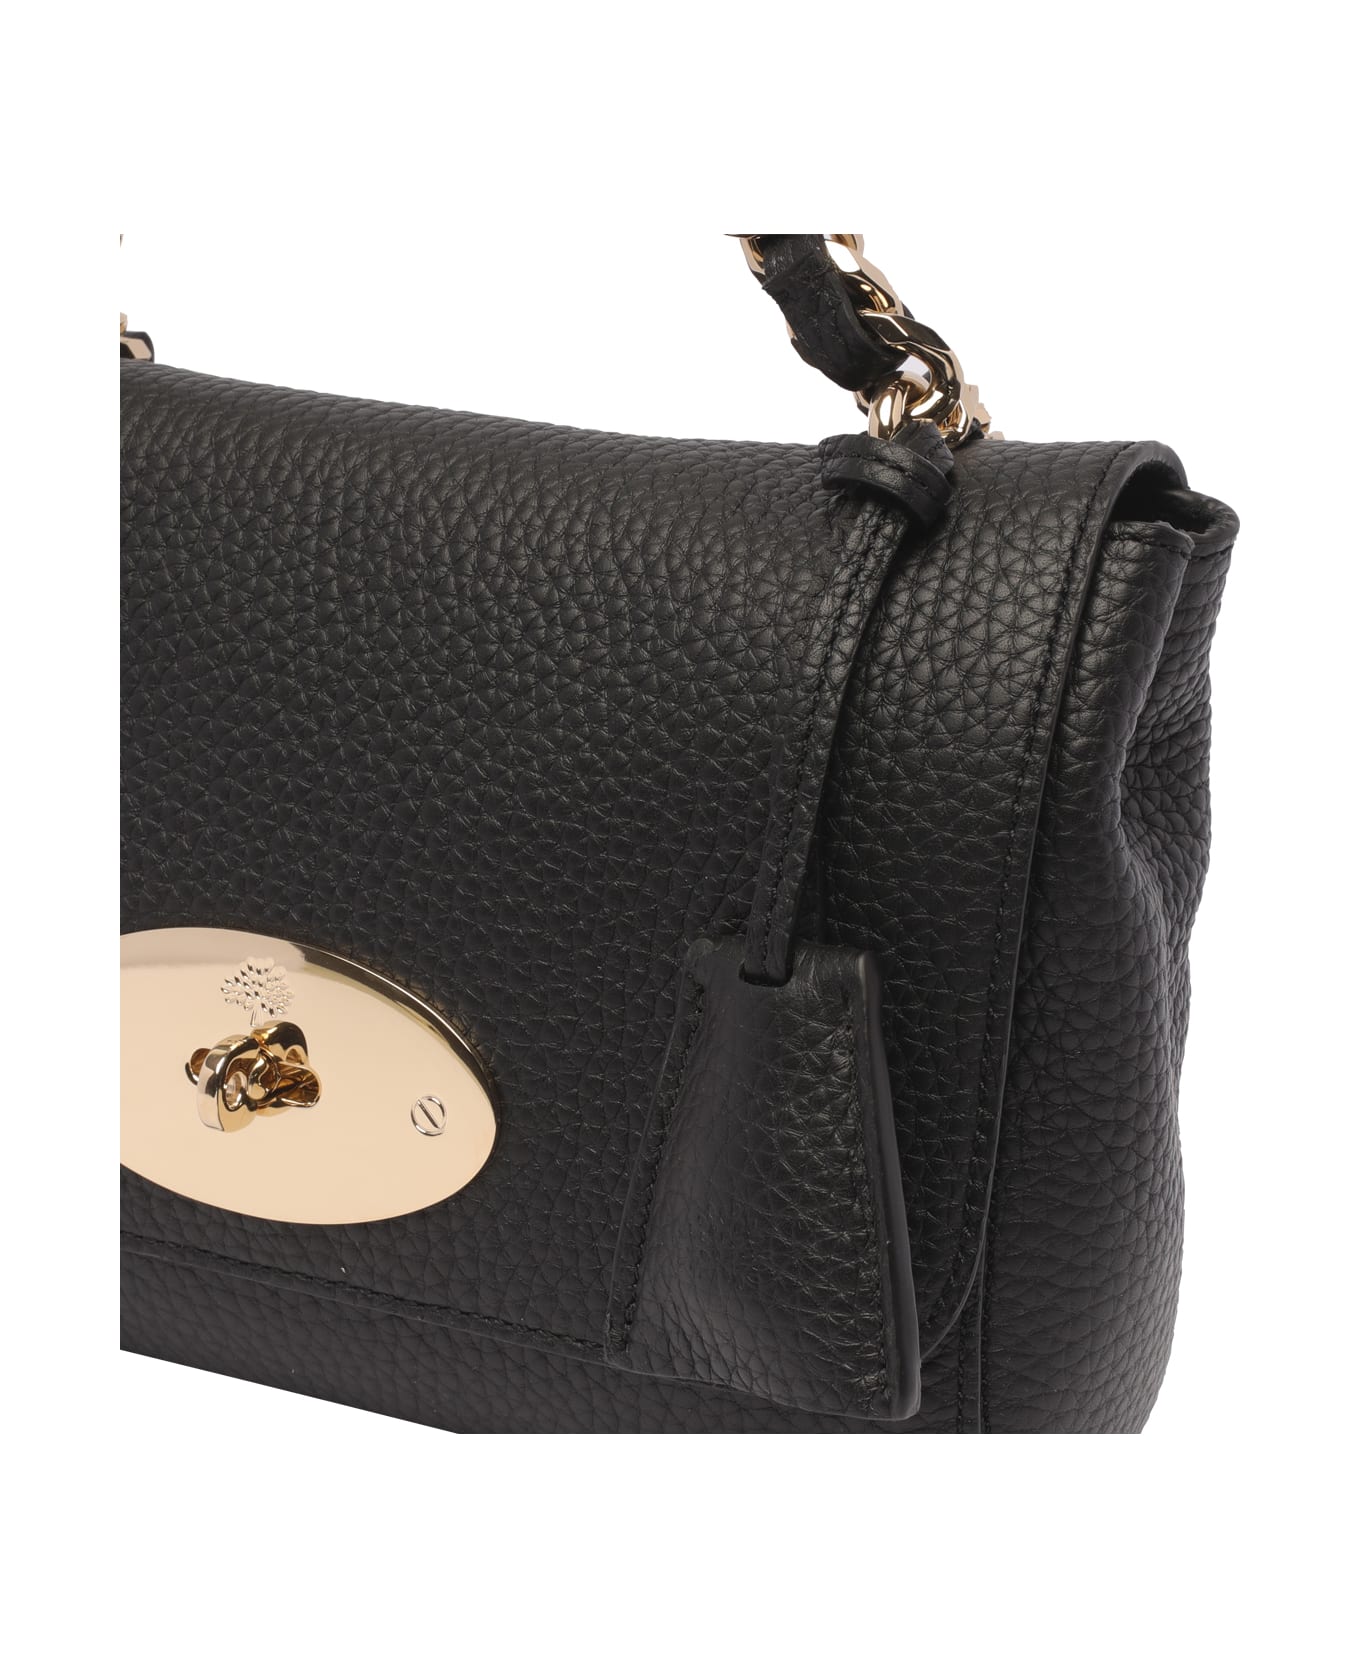 Mulberry Lily Top Handle Crossbody Bag - Black トートバッグ